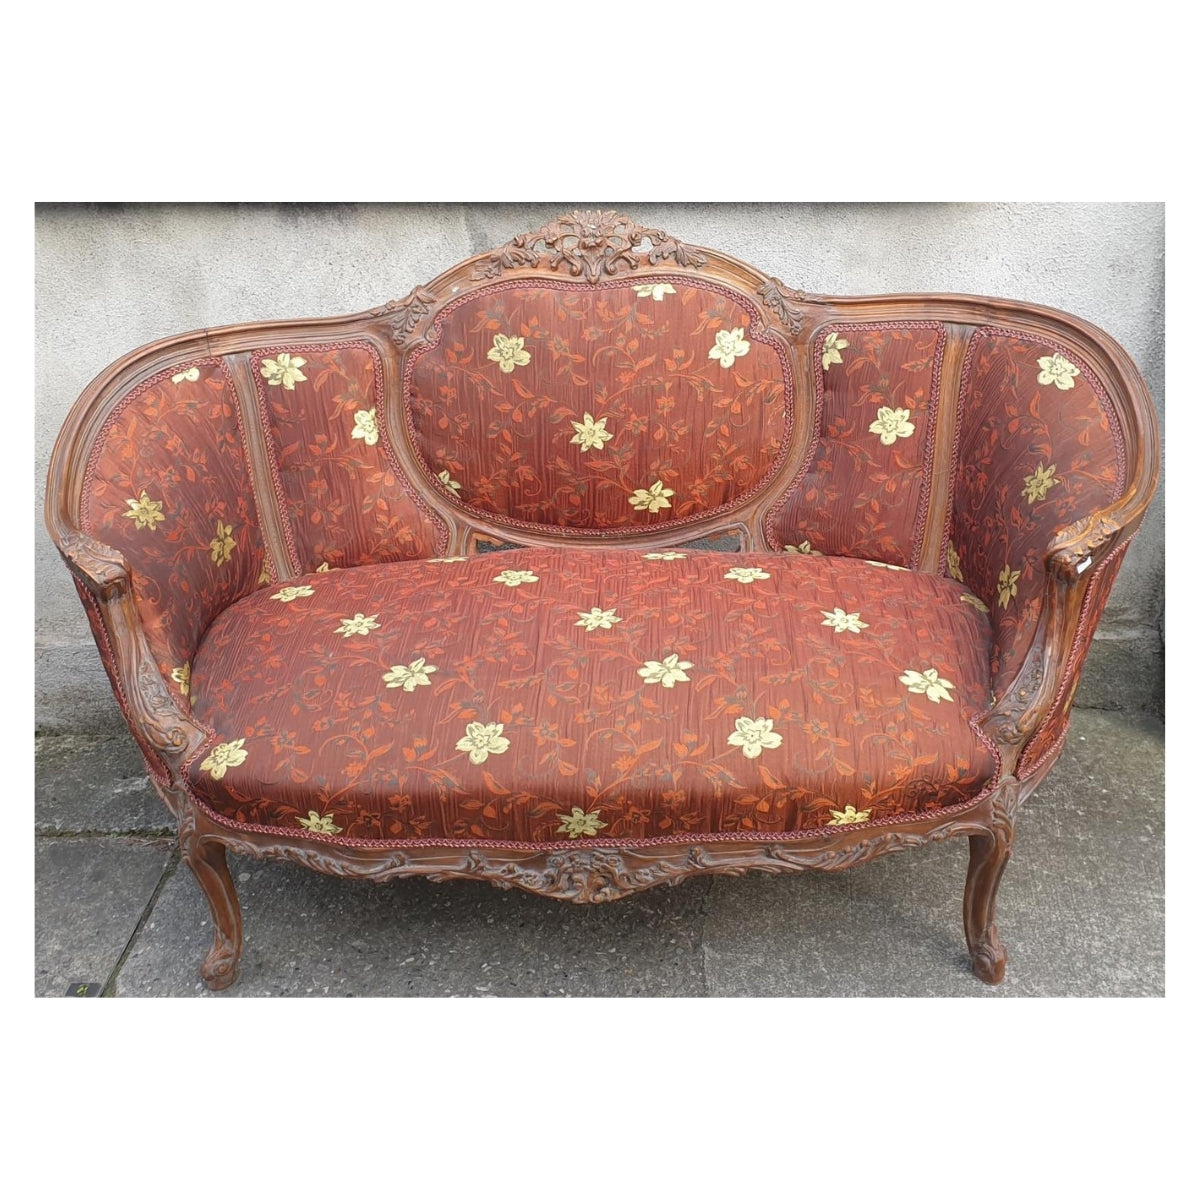 Two Seater Sofa with Ornately Carved Detail